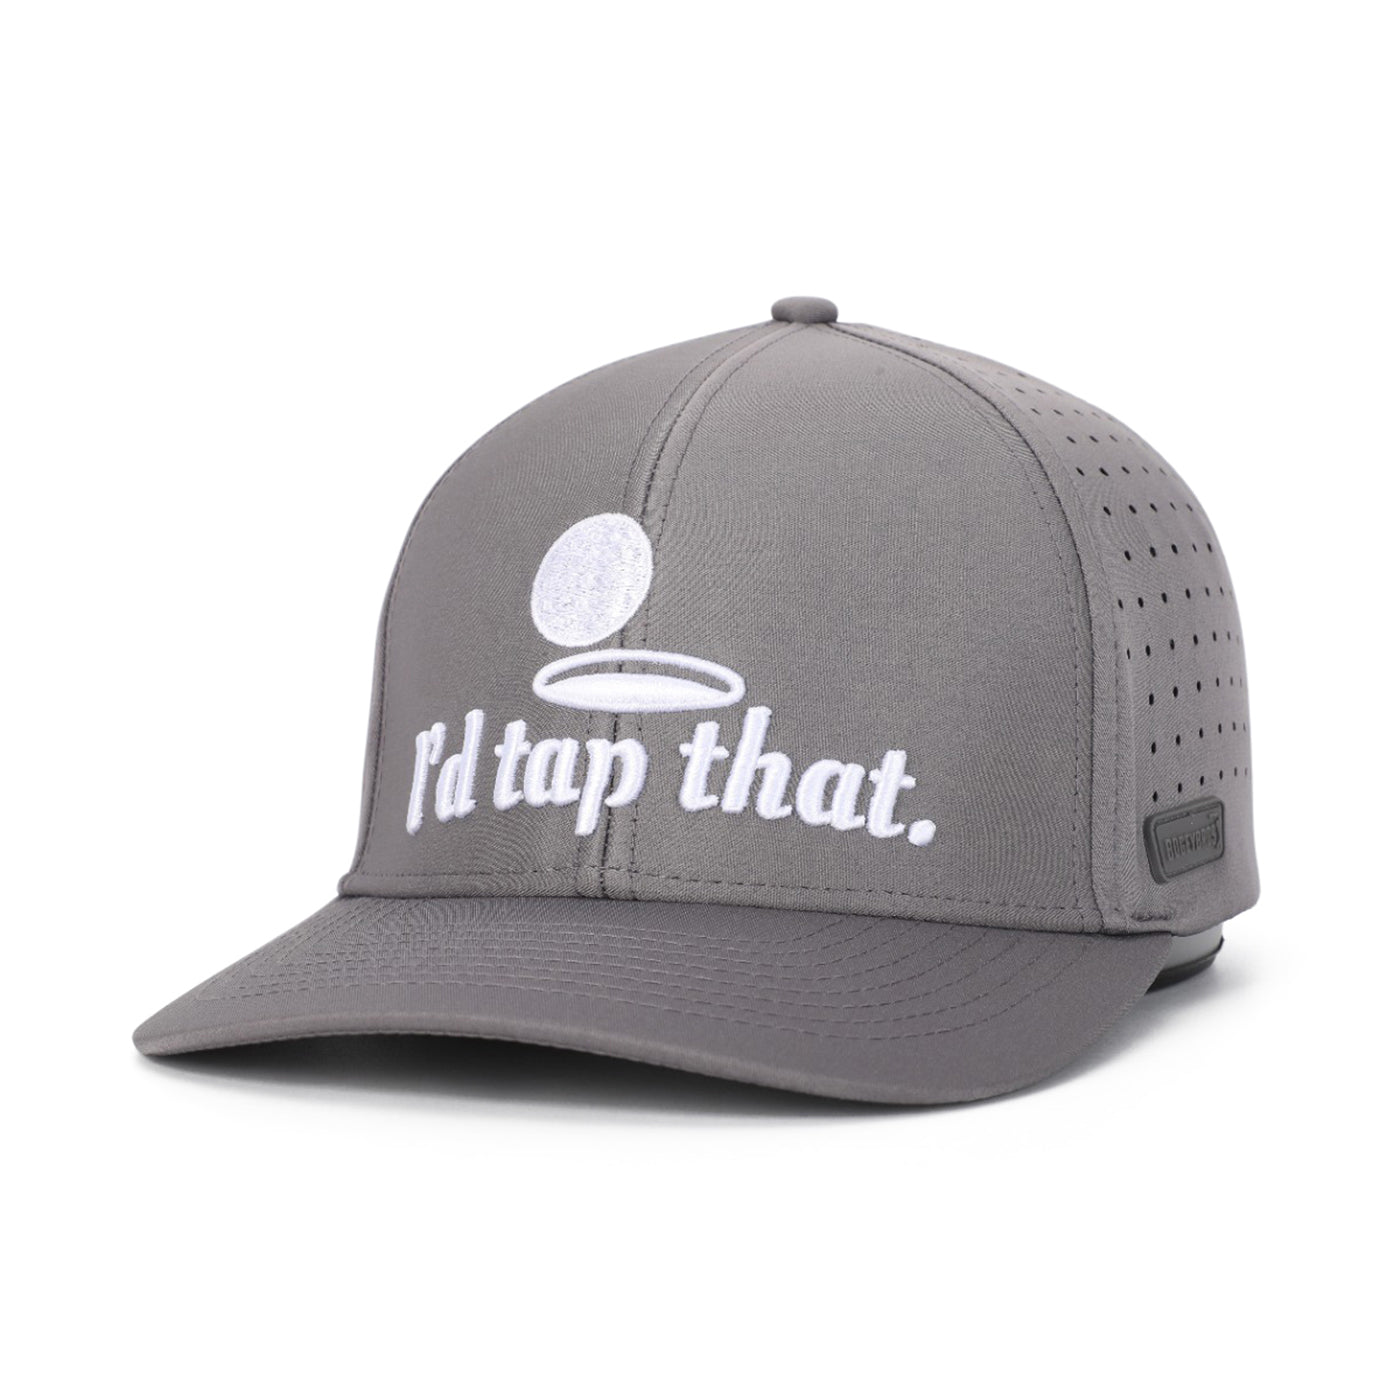 I'd Tap That - Performance Golf Hat - Fitted